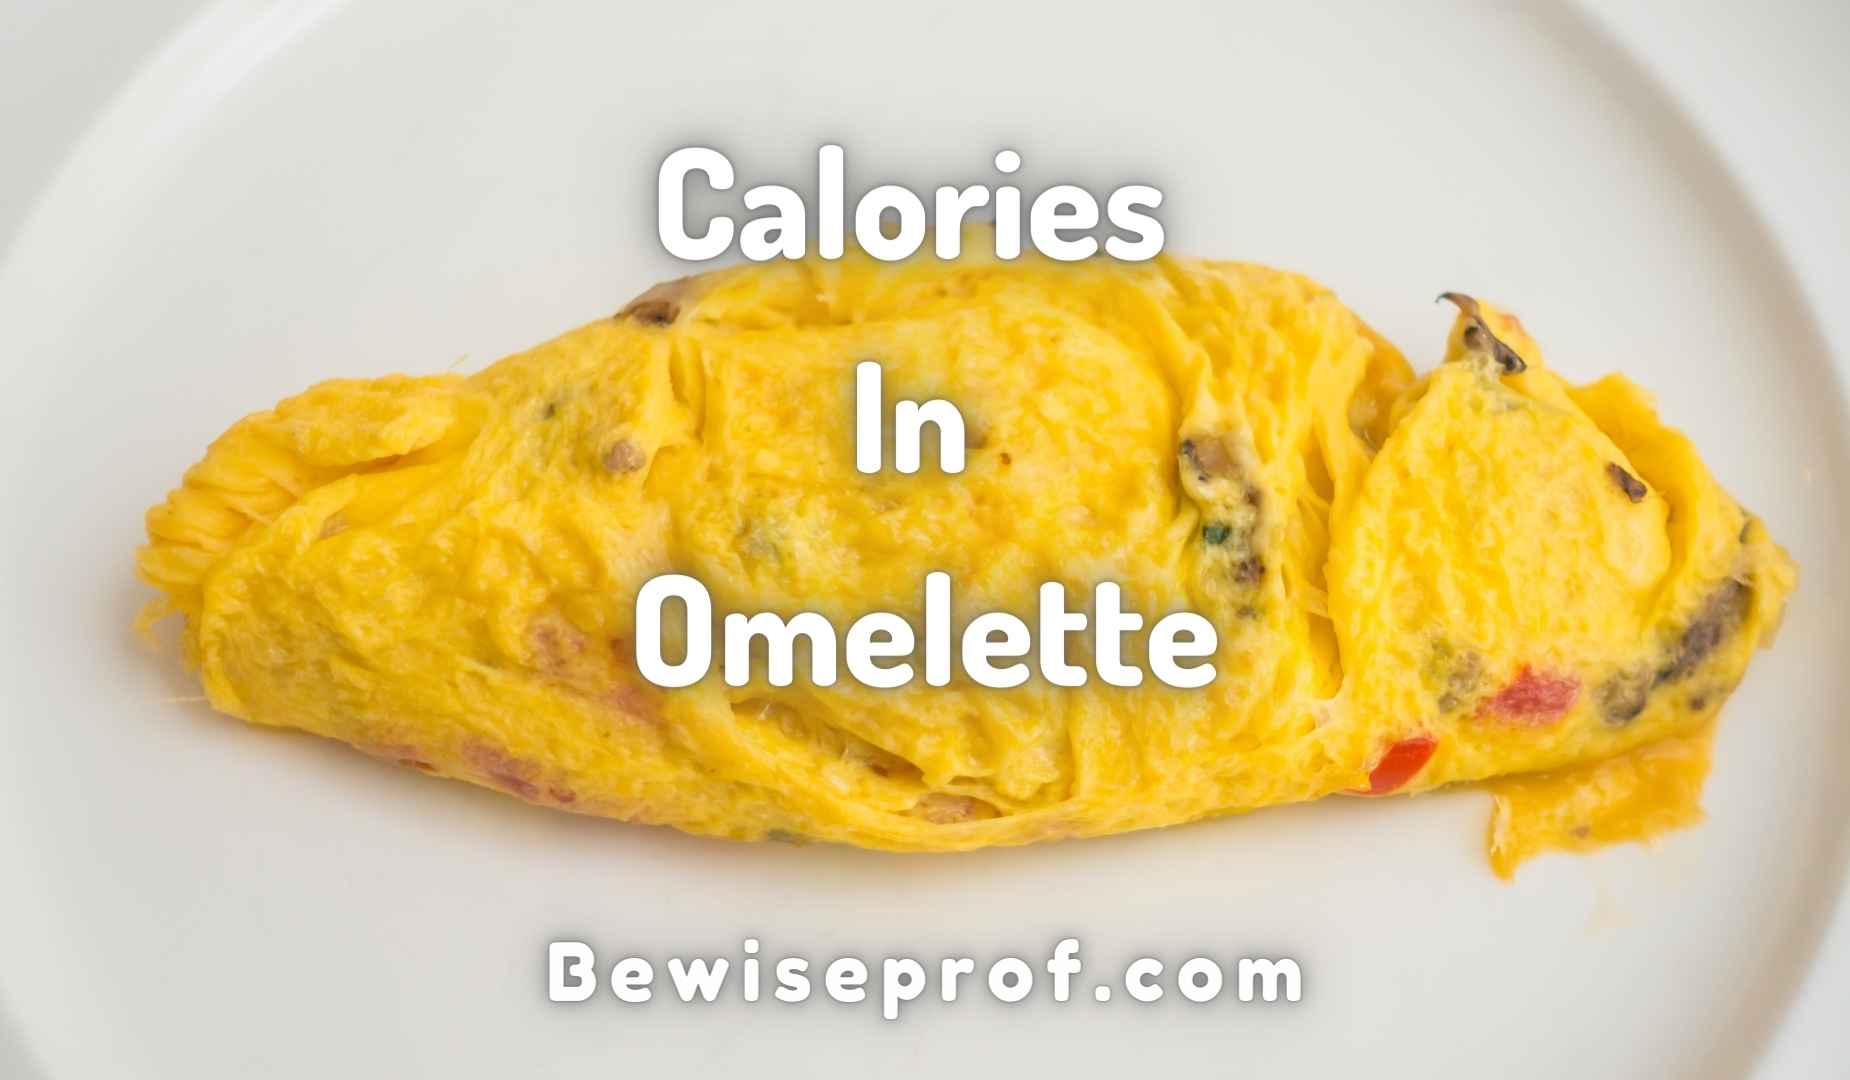 Calories in Omelette